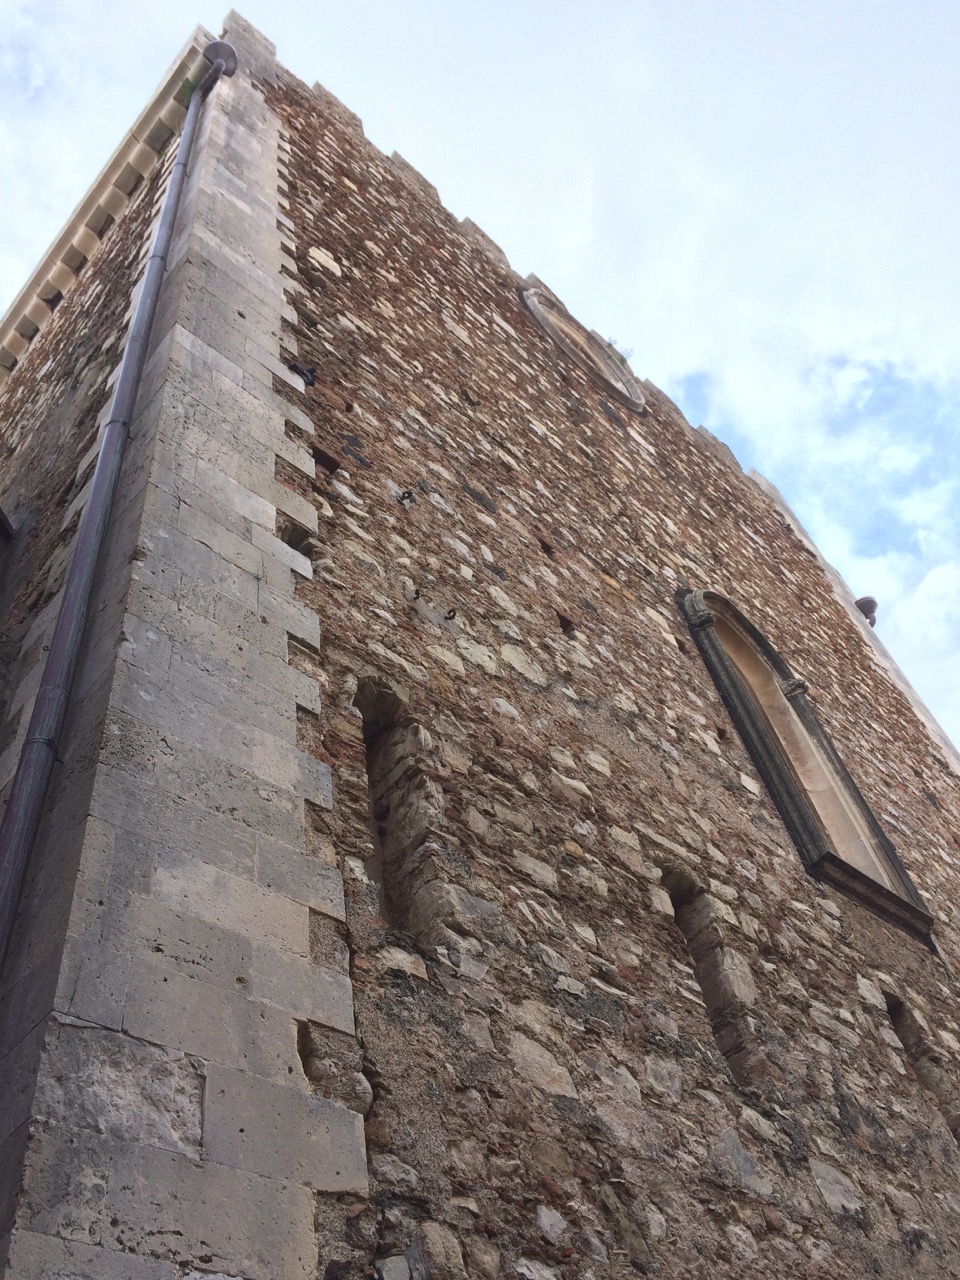 Taormina is full of fine examples of Medieval architectire